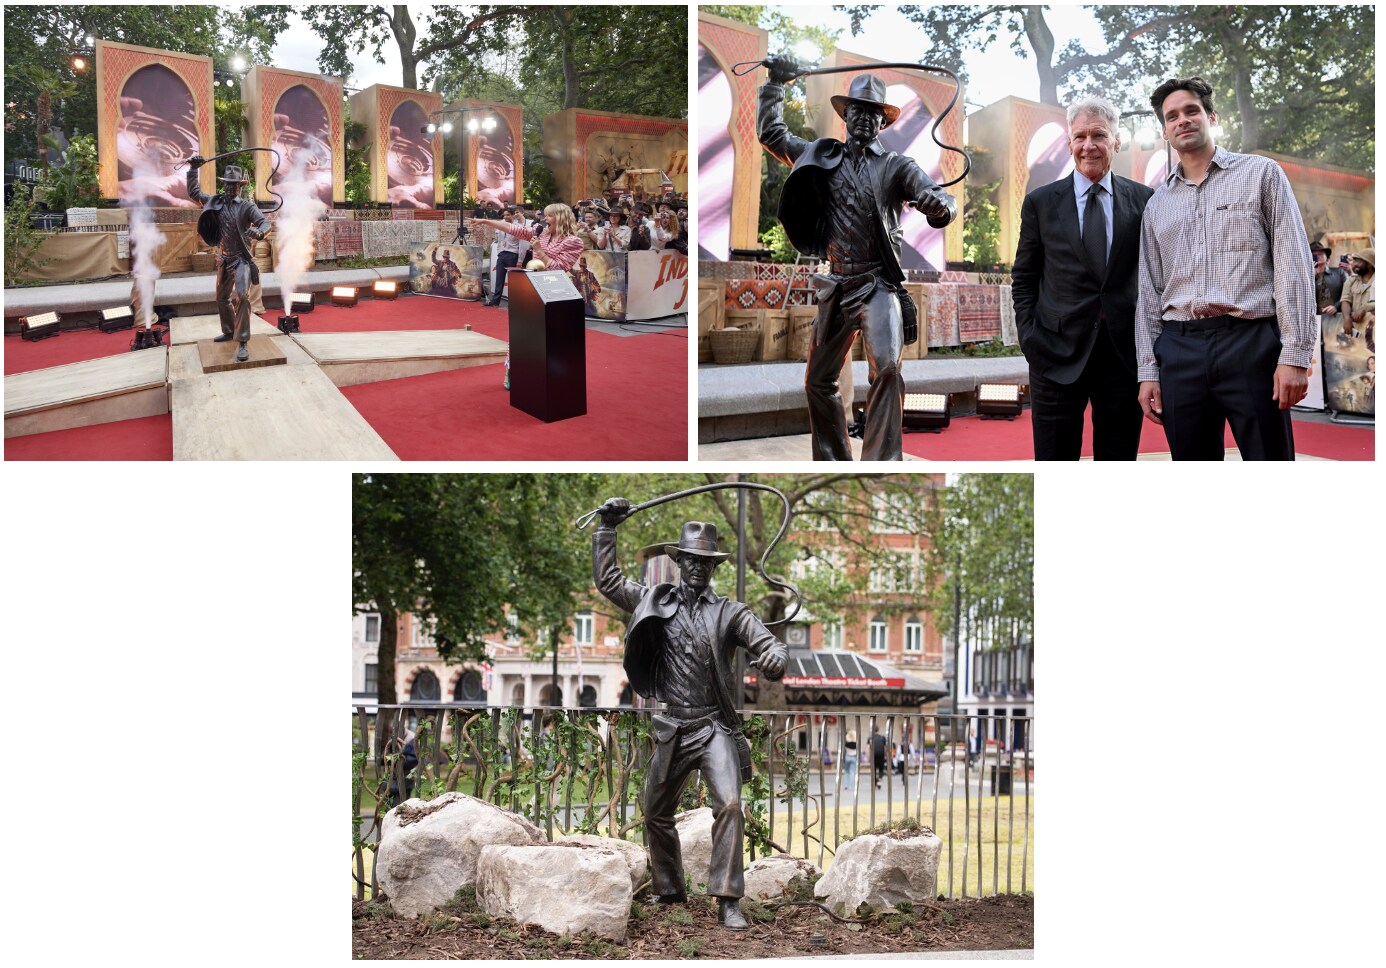 Selection of images of the new Indiana Jones bronze statue in Leicester Square. Top left of the reveal at the premiere, top right of Harrison Ford and the Sculptor, bottom of the statue in Leicester Square.